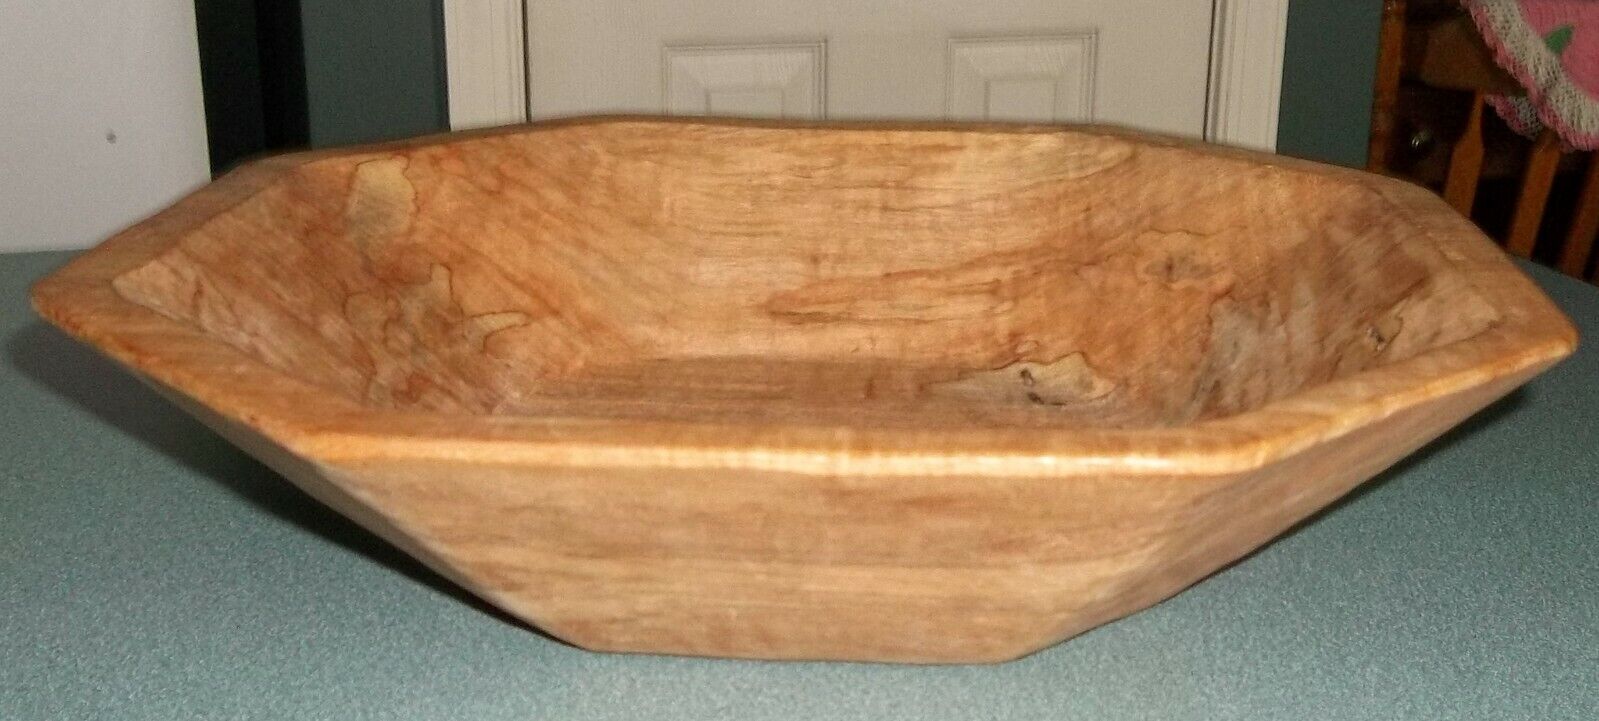 1999 Primitive Hand Hewn Curly Maple Wood Bowl Signed RIP & Tammy Mann